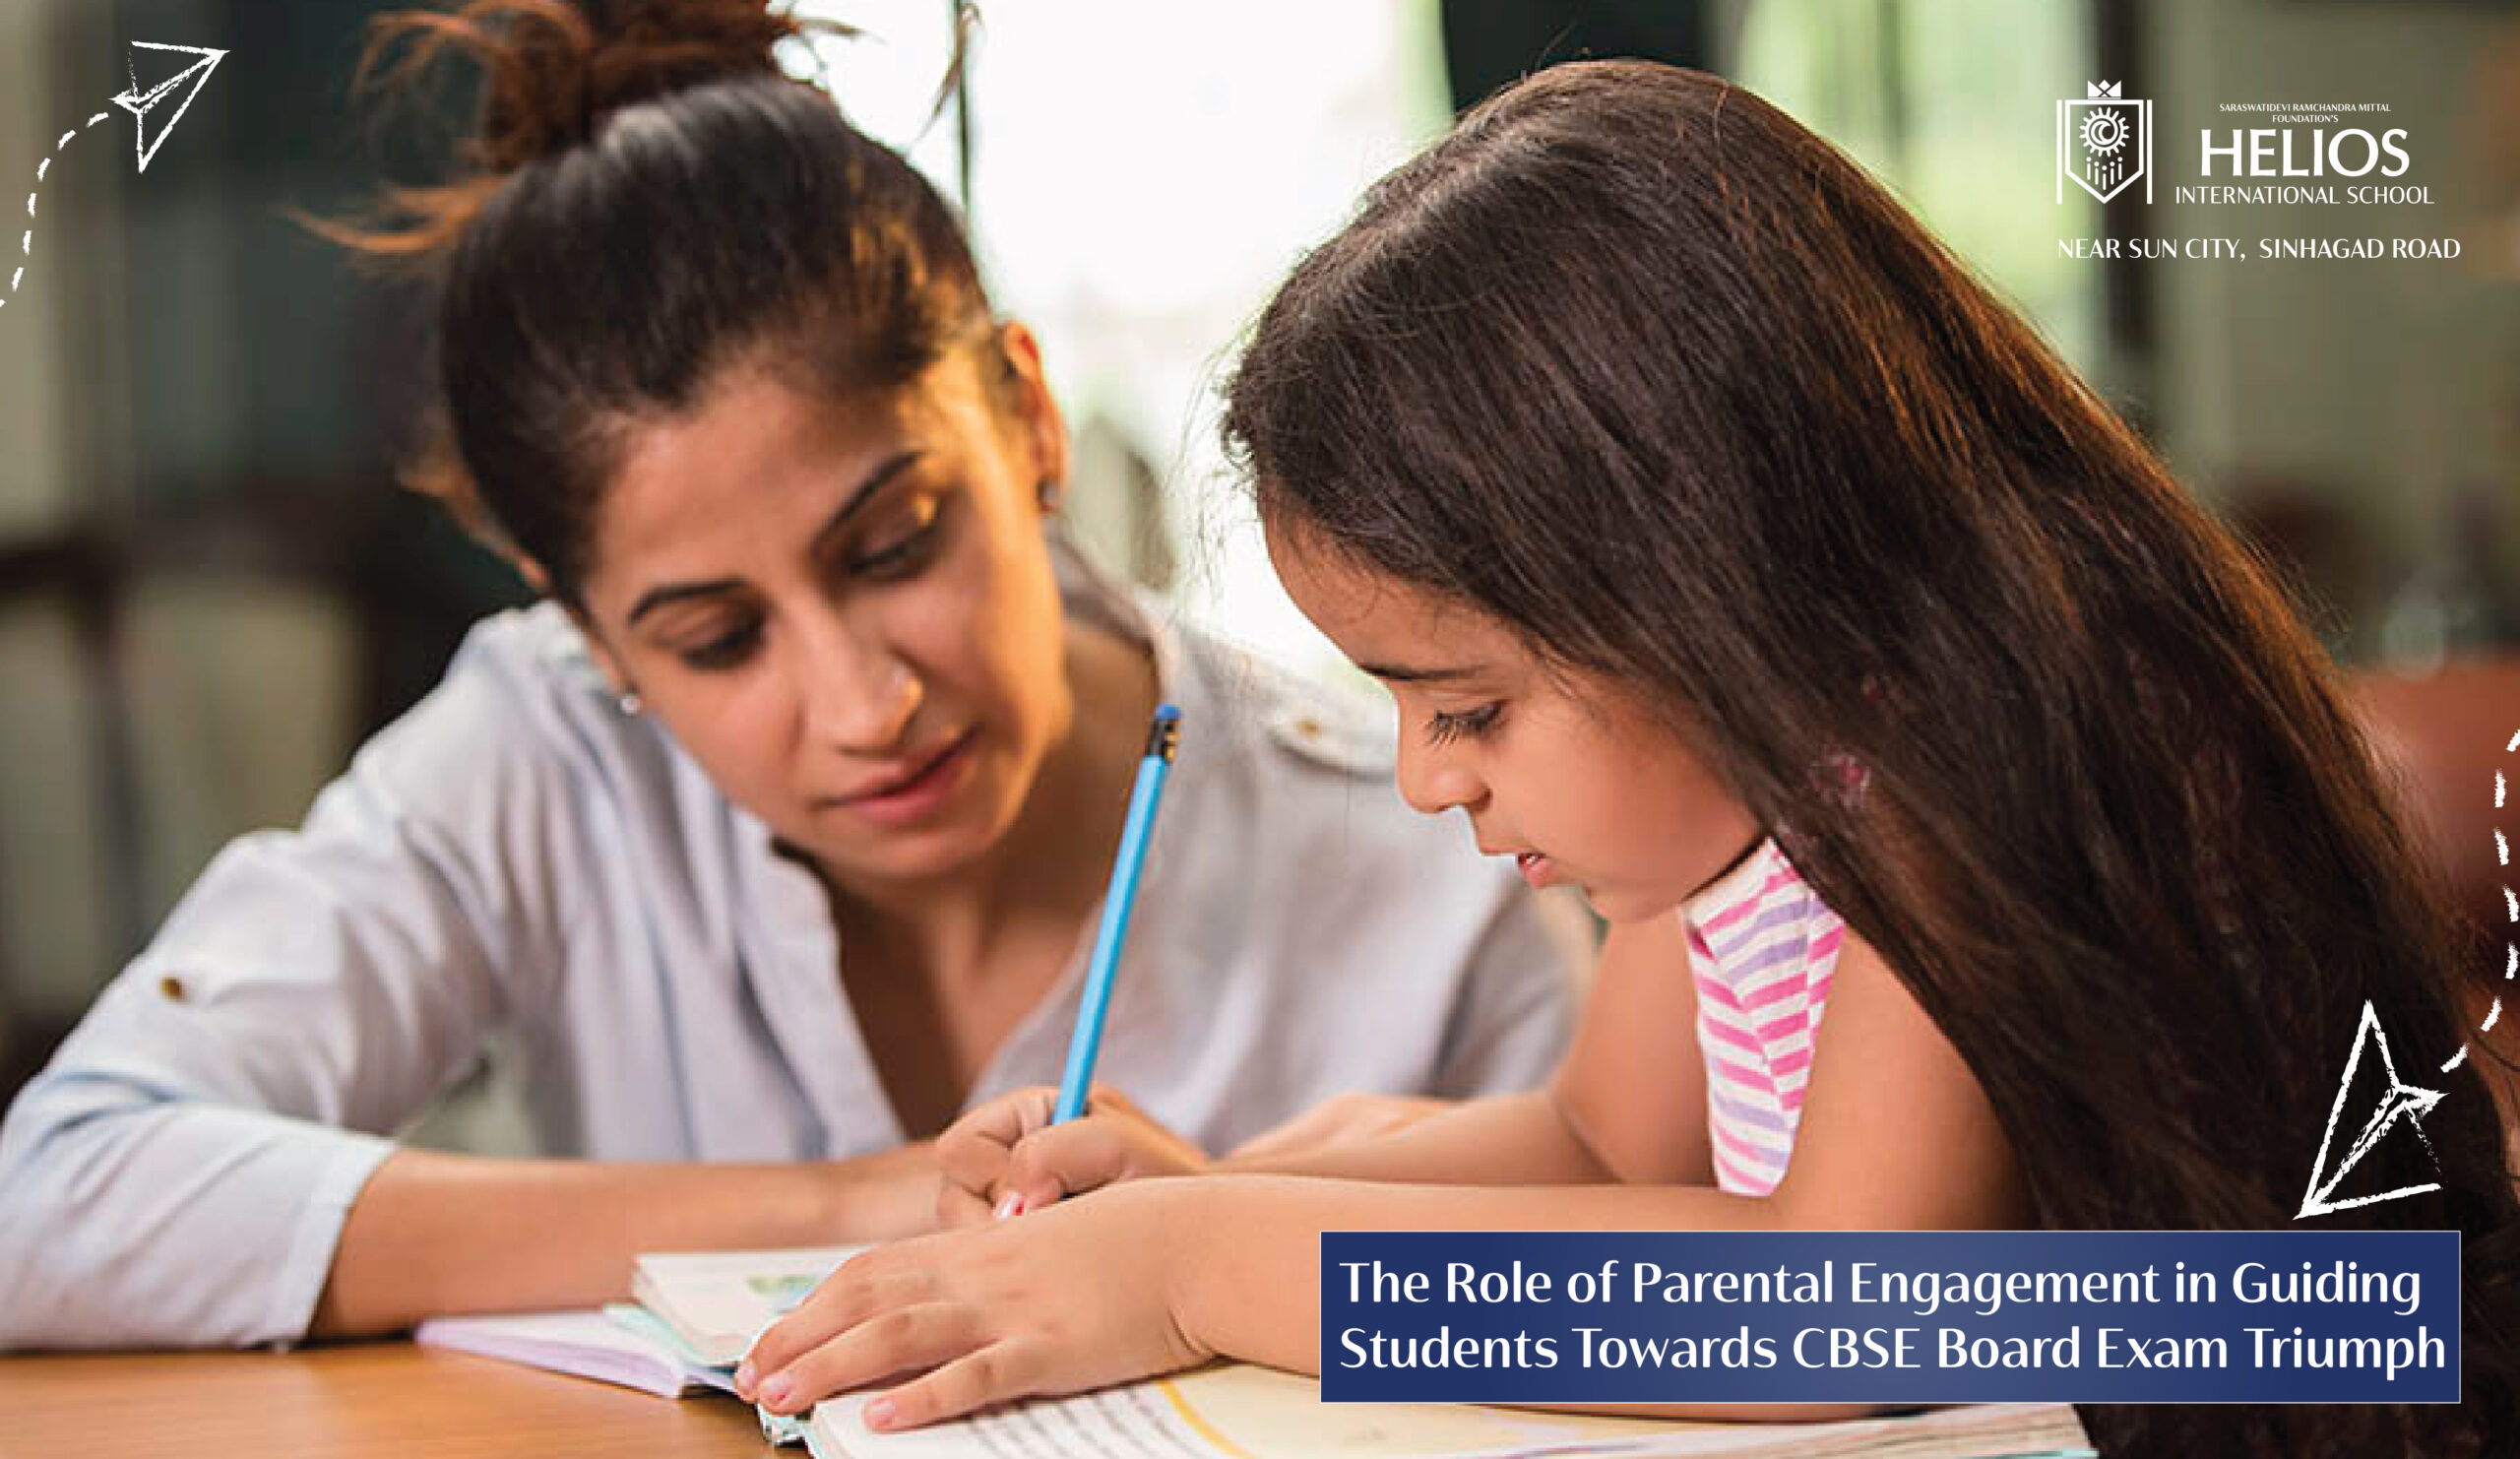 The Role of Parental Engagement in Guiding Students Towards CBSE Board Exam Triumph